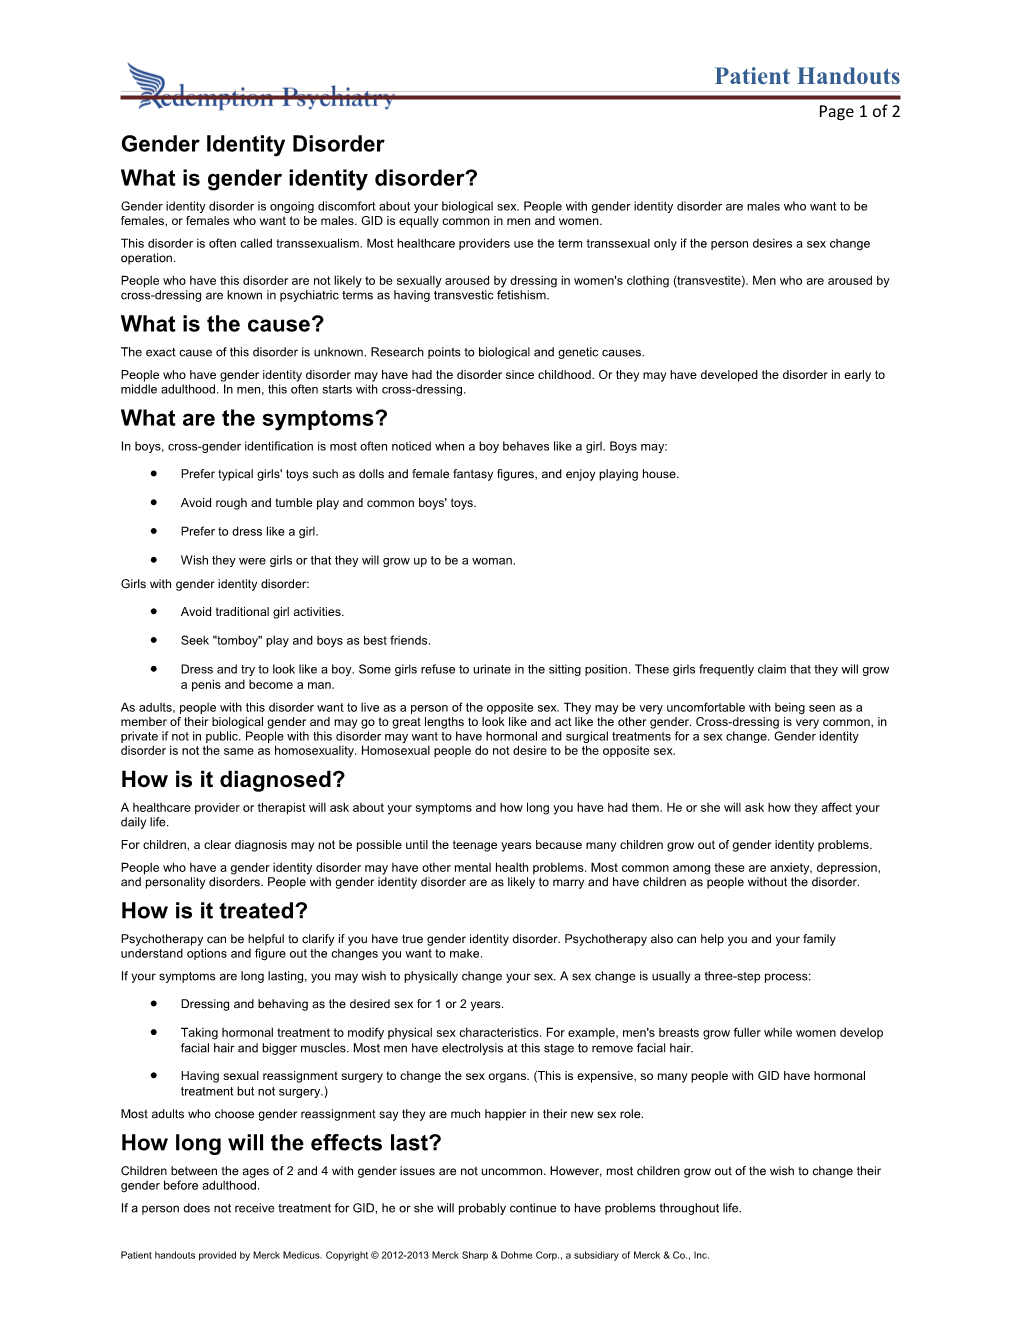 What Is Gender Identity Disorder?